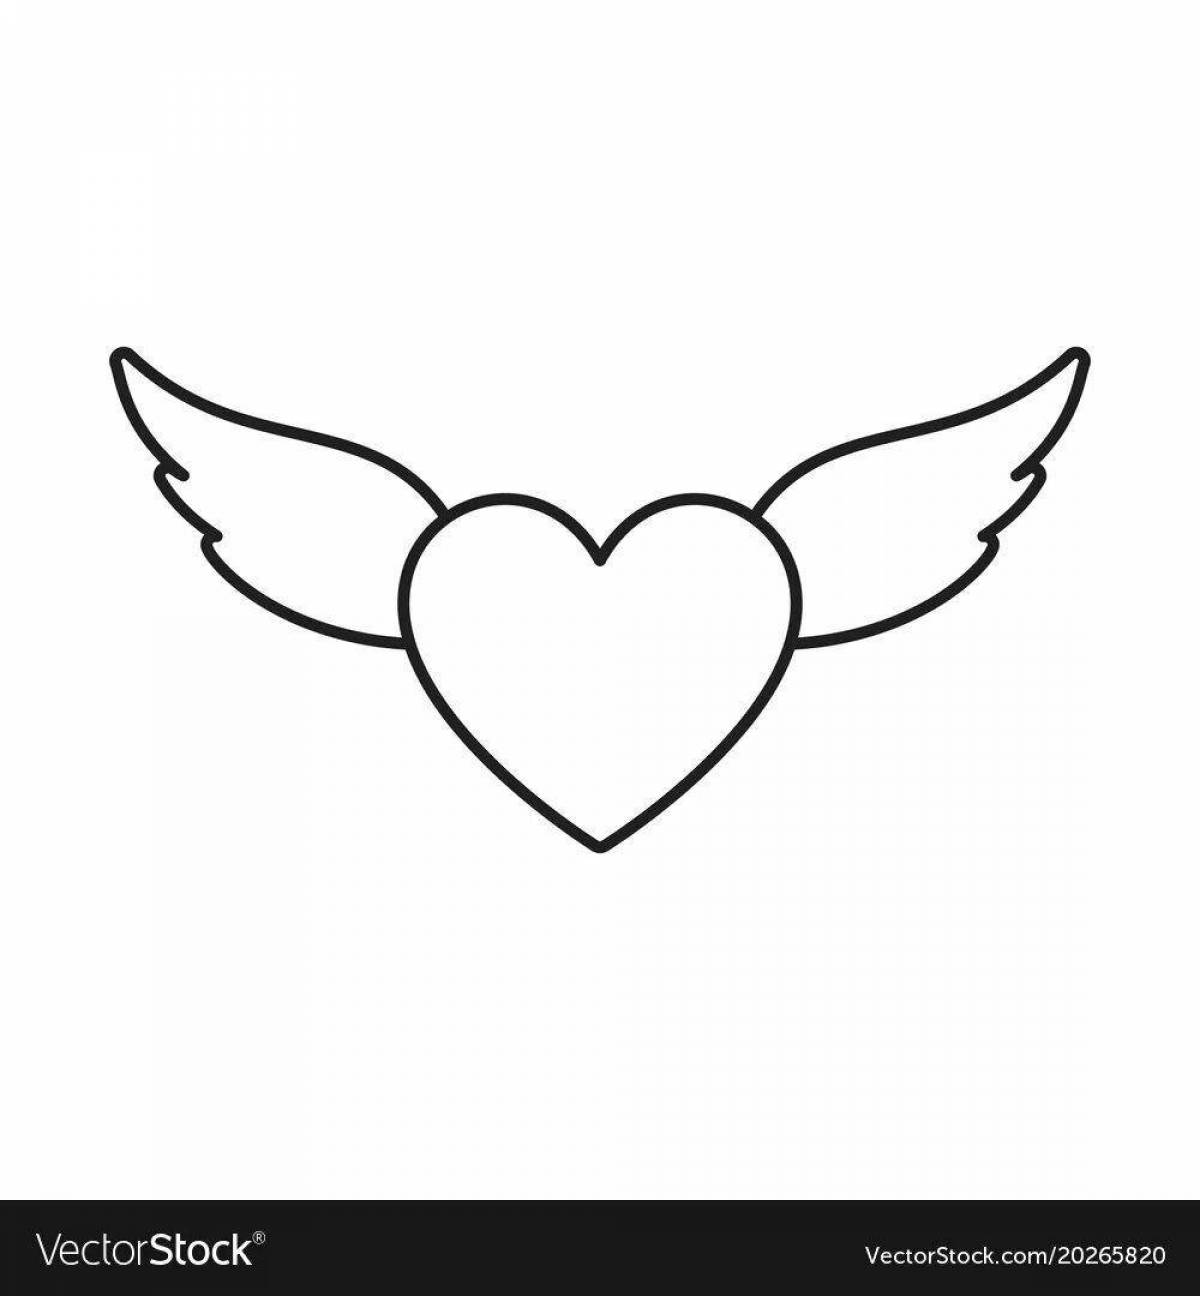 Mysterious coloring heart with wings